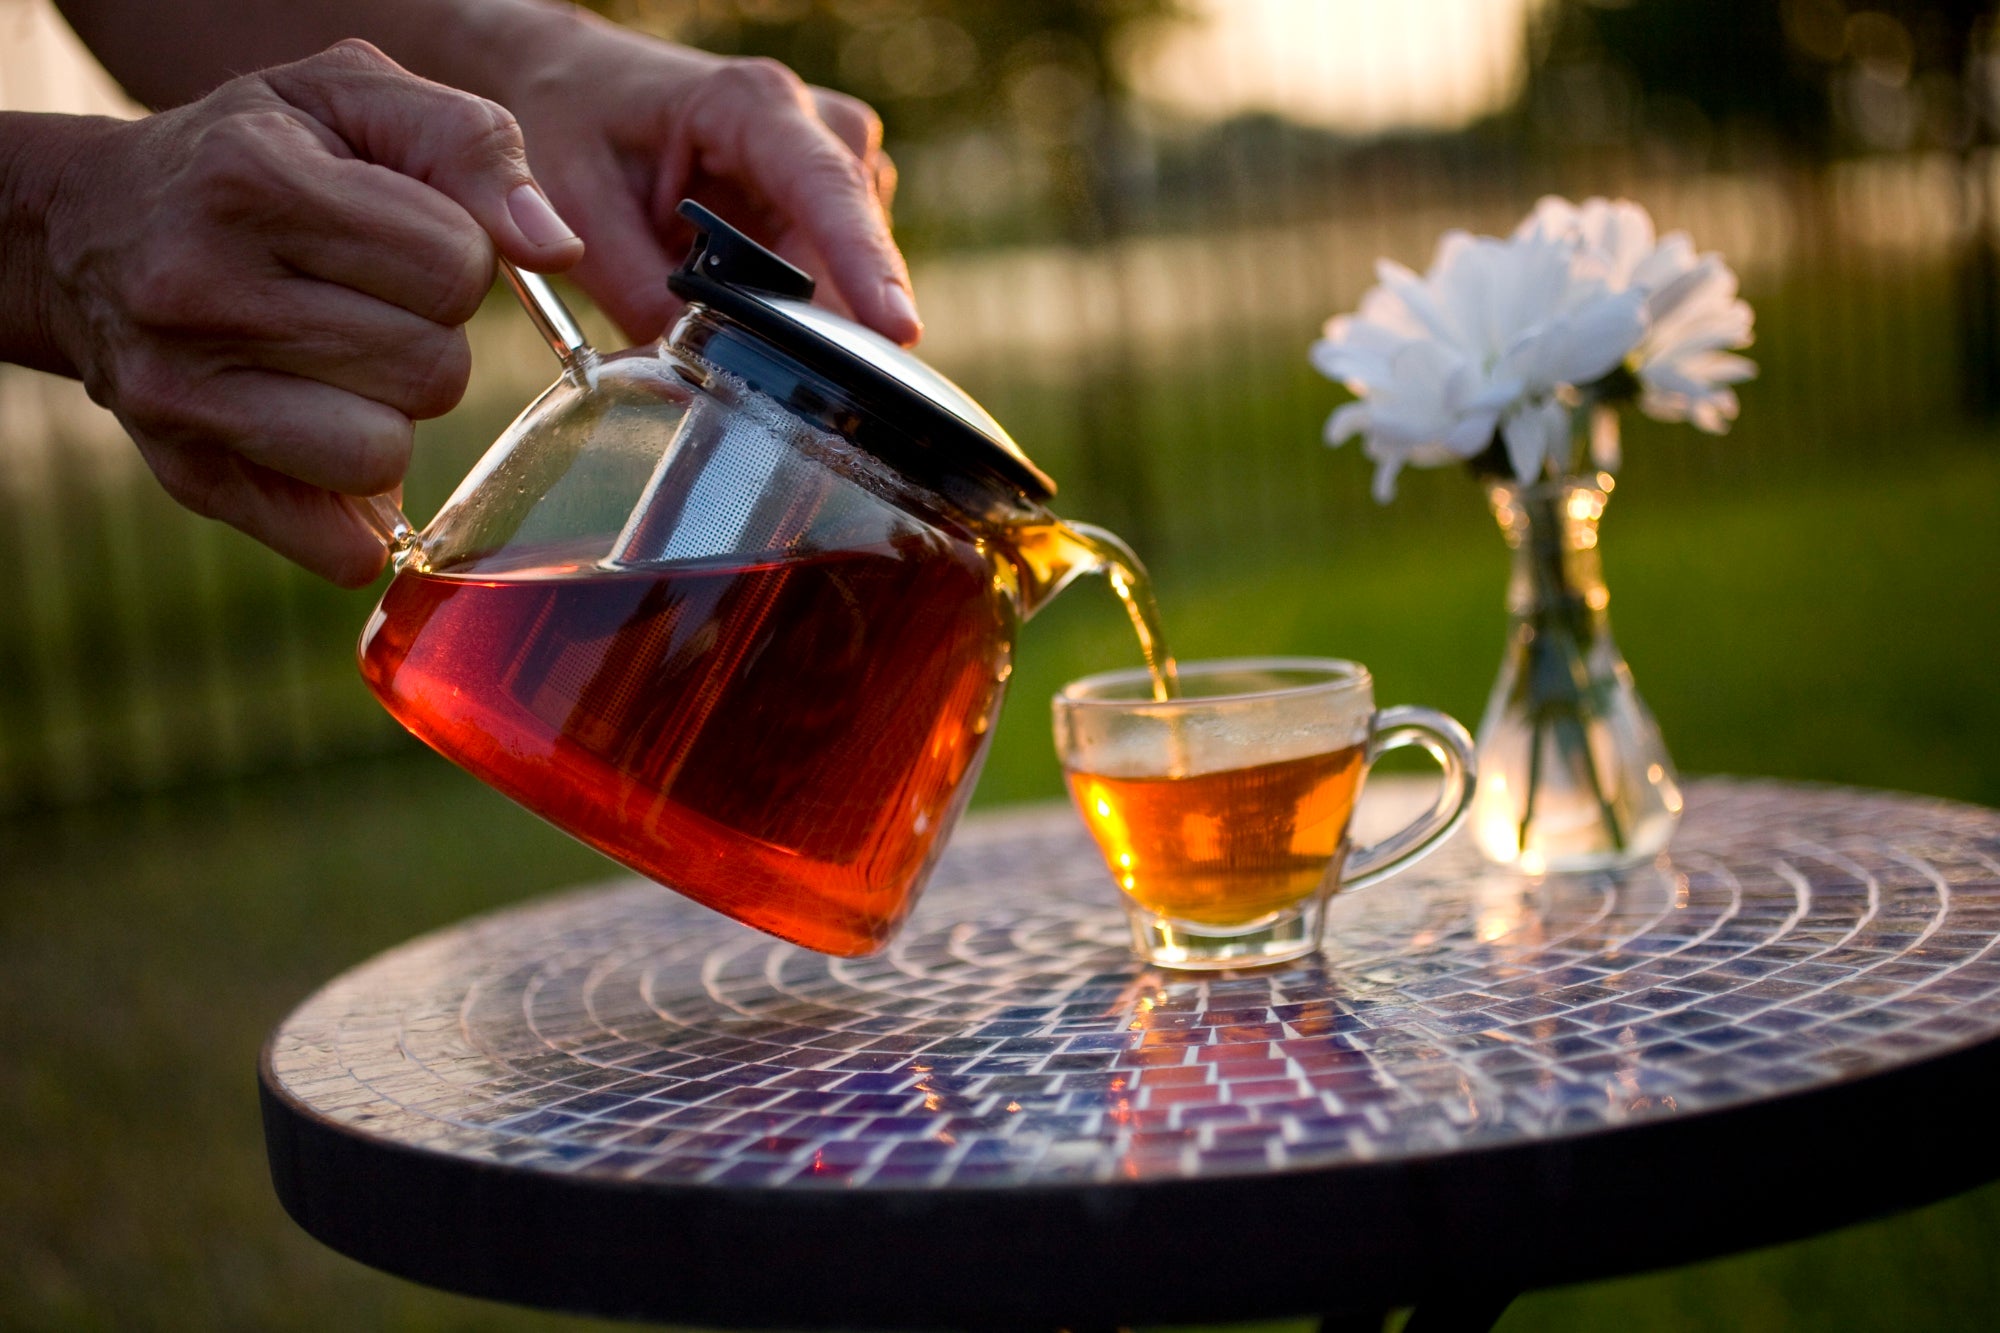 19 Best Gifts for Tea Lovers - Buy Side from WSJ